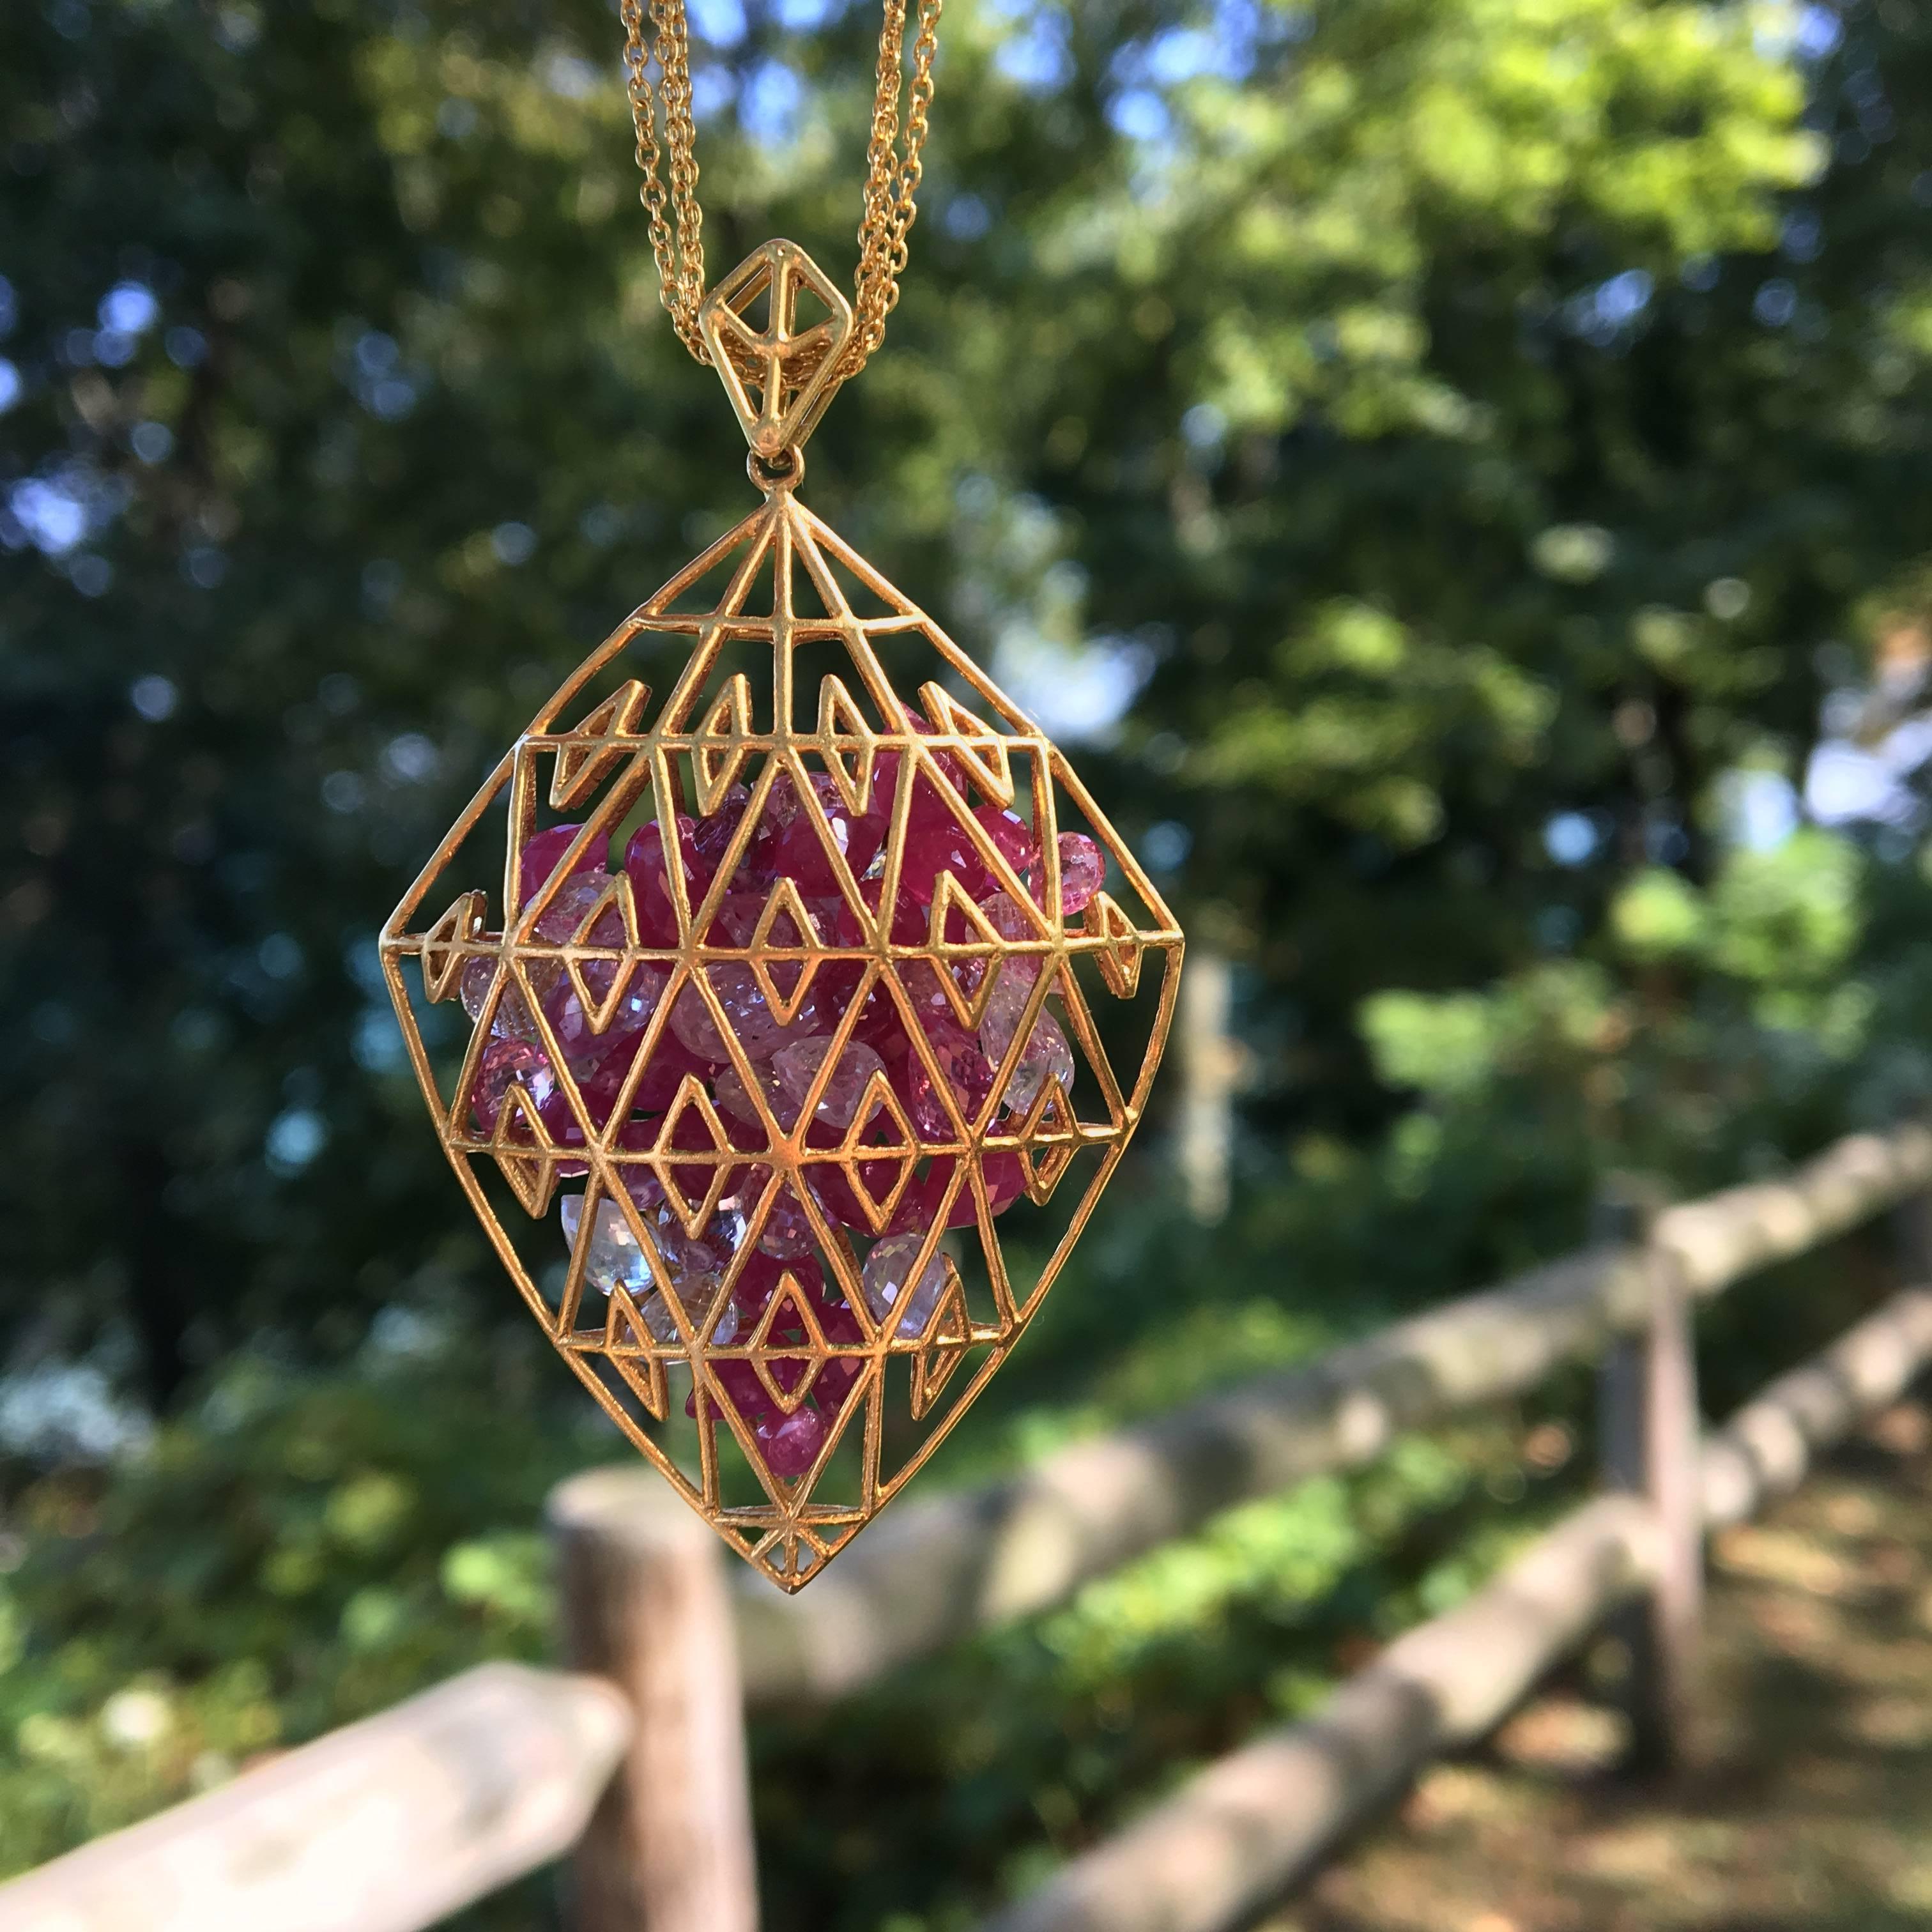 This pink sapphire and 18kt Gold pendant is a creative and playful work of art.  Shades of dark to light pink loose sapphires are loose and free to move around securely inside the 18kt matte gold cage pendant.  

30 inches of 3 separate 18kt Gold